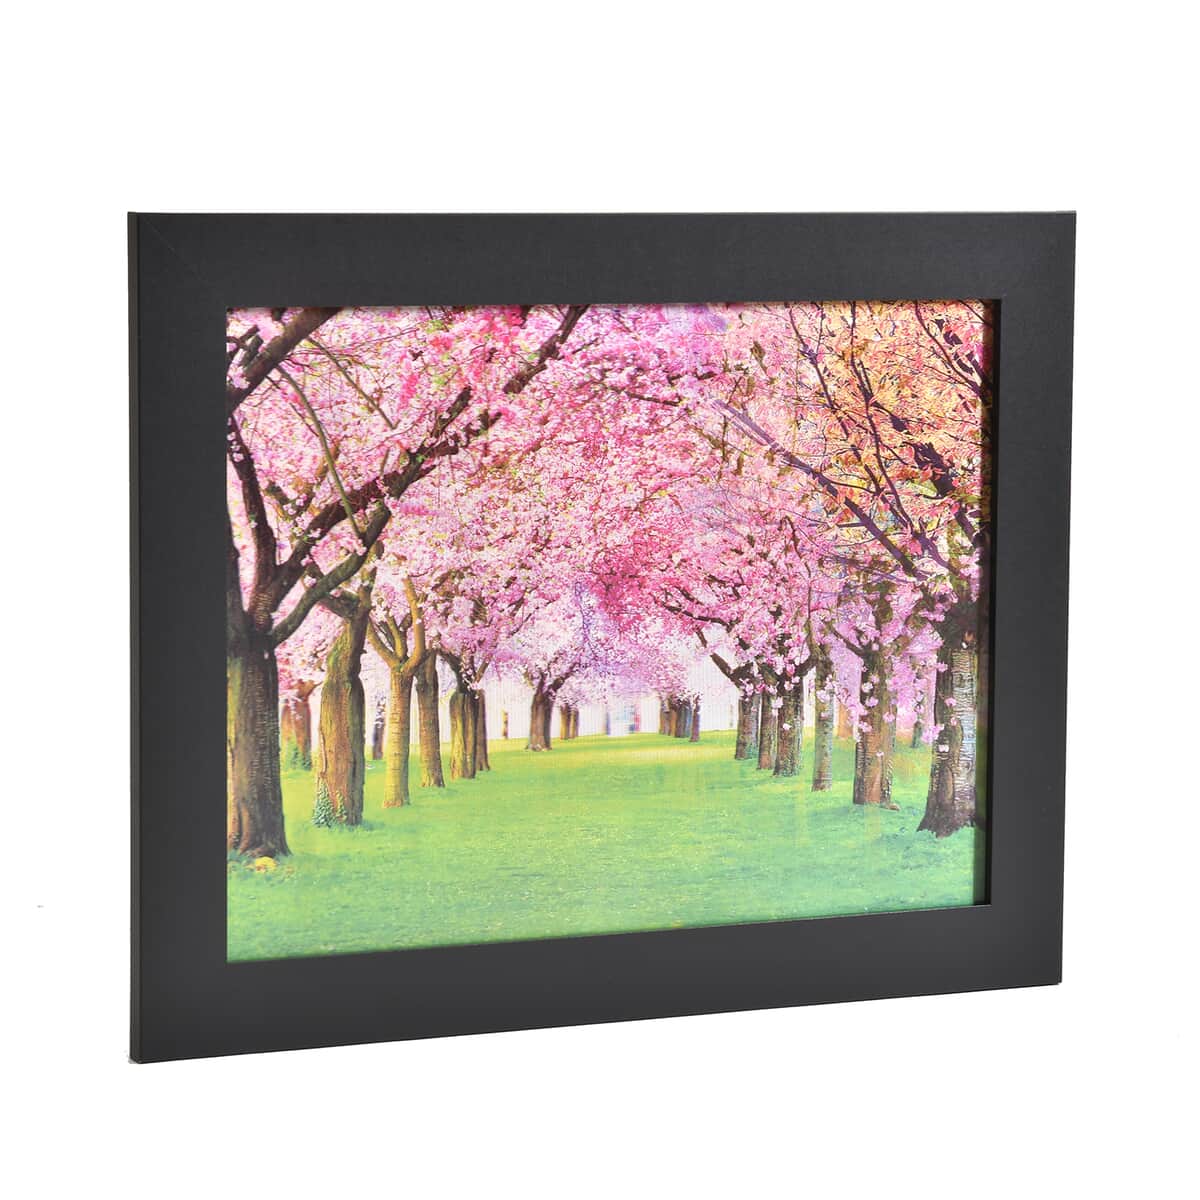 Witch 3D Holographic Painting 3 Images in 1 Picture Frame (11.81"x15.75") image number 2